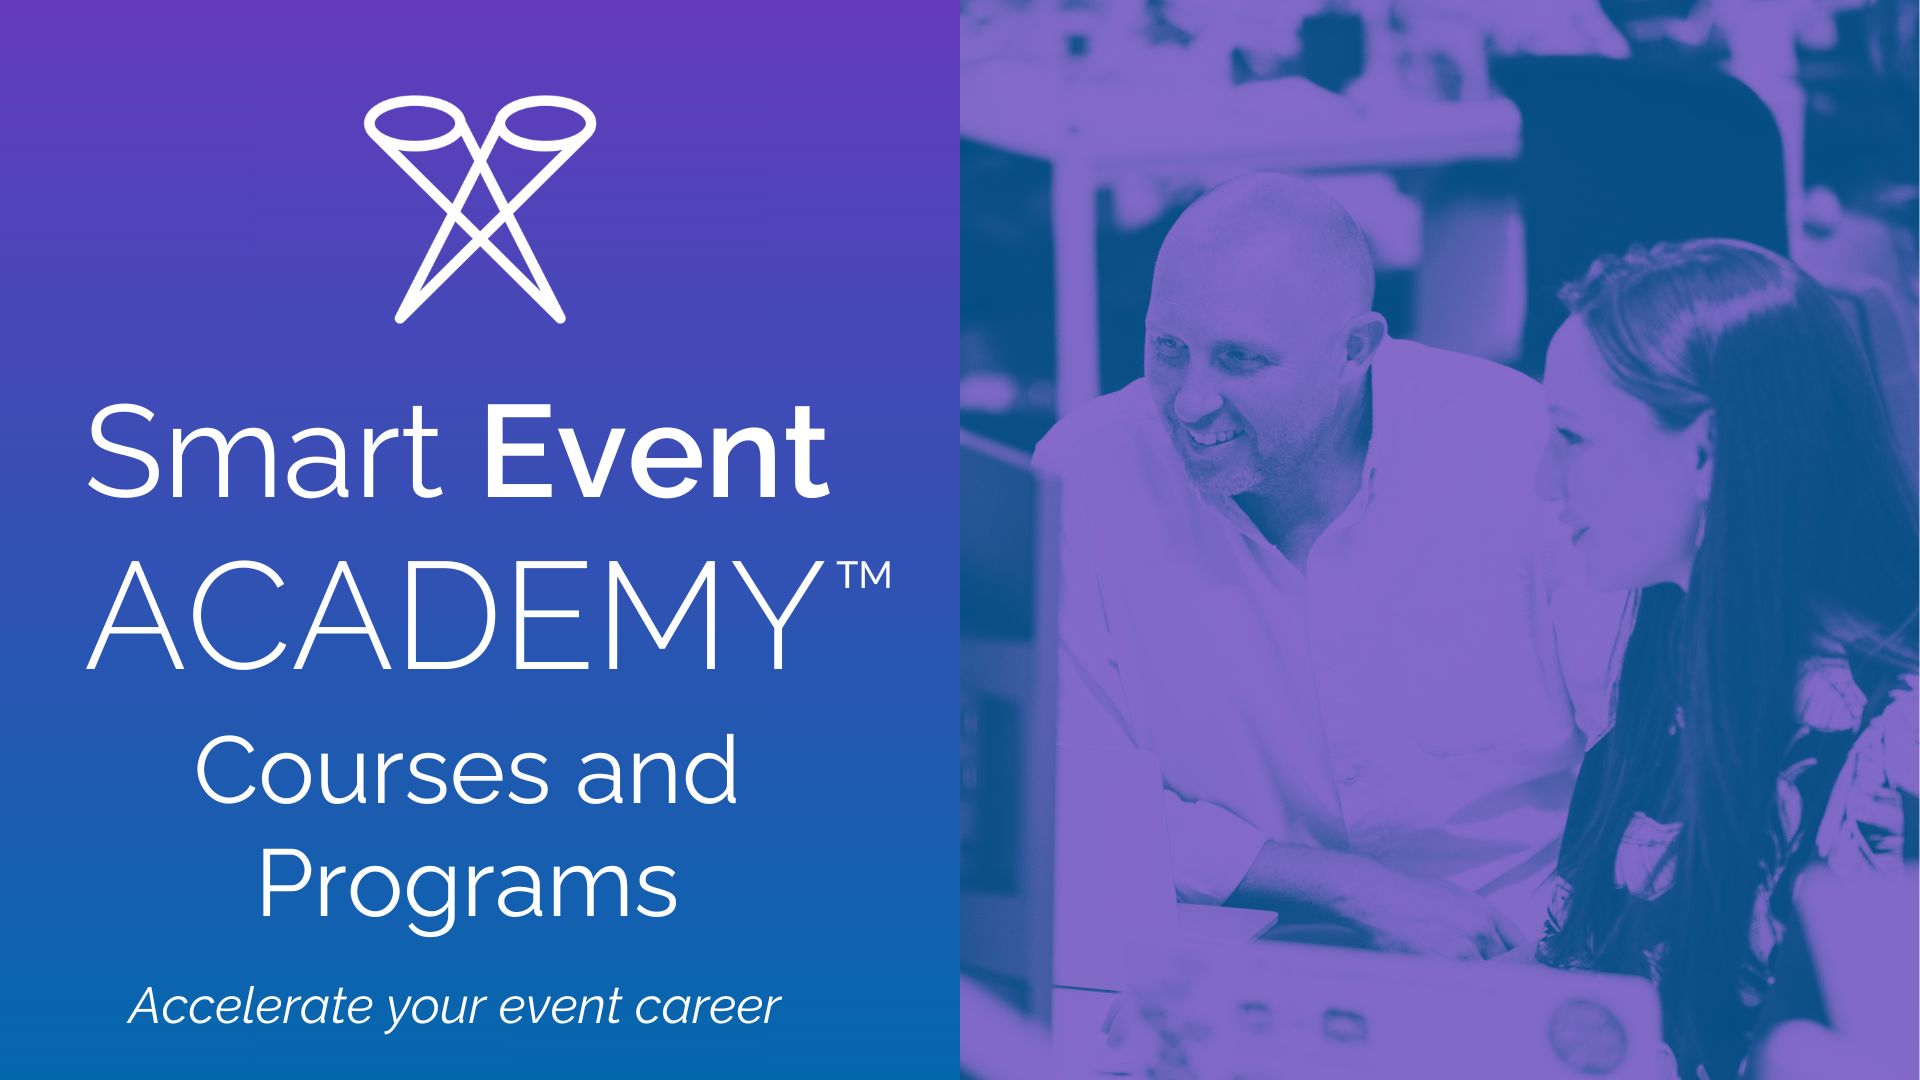 Smart Event Academy Courses and Programs. Accelerate your event career